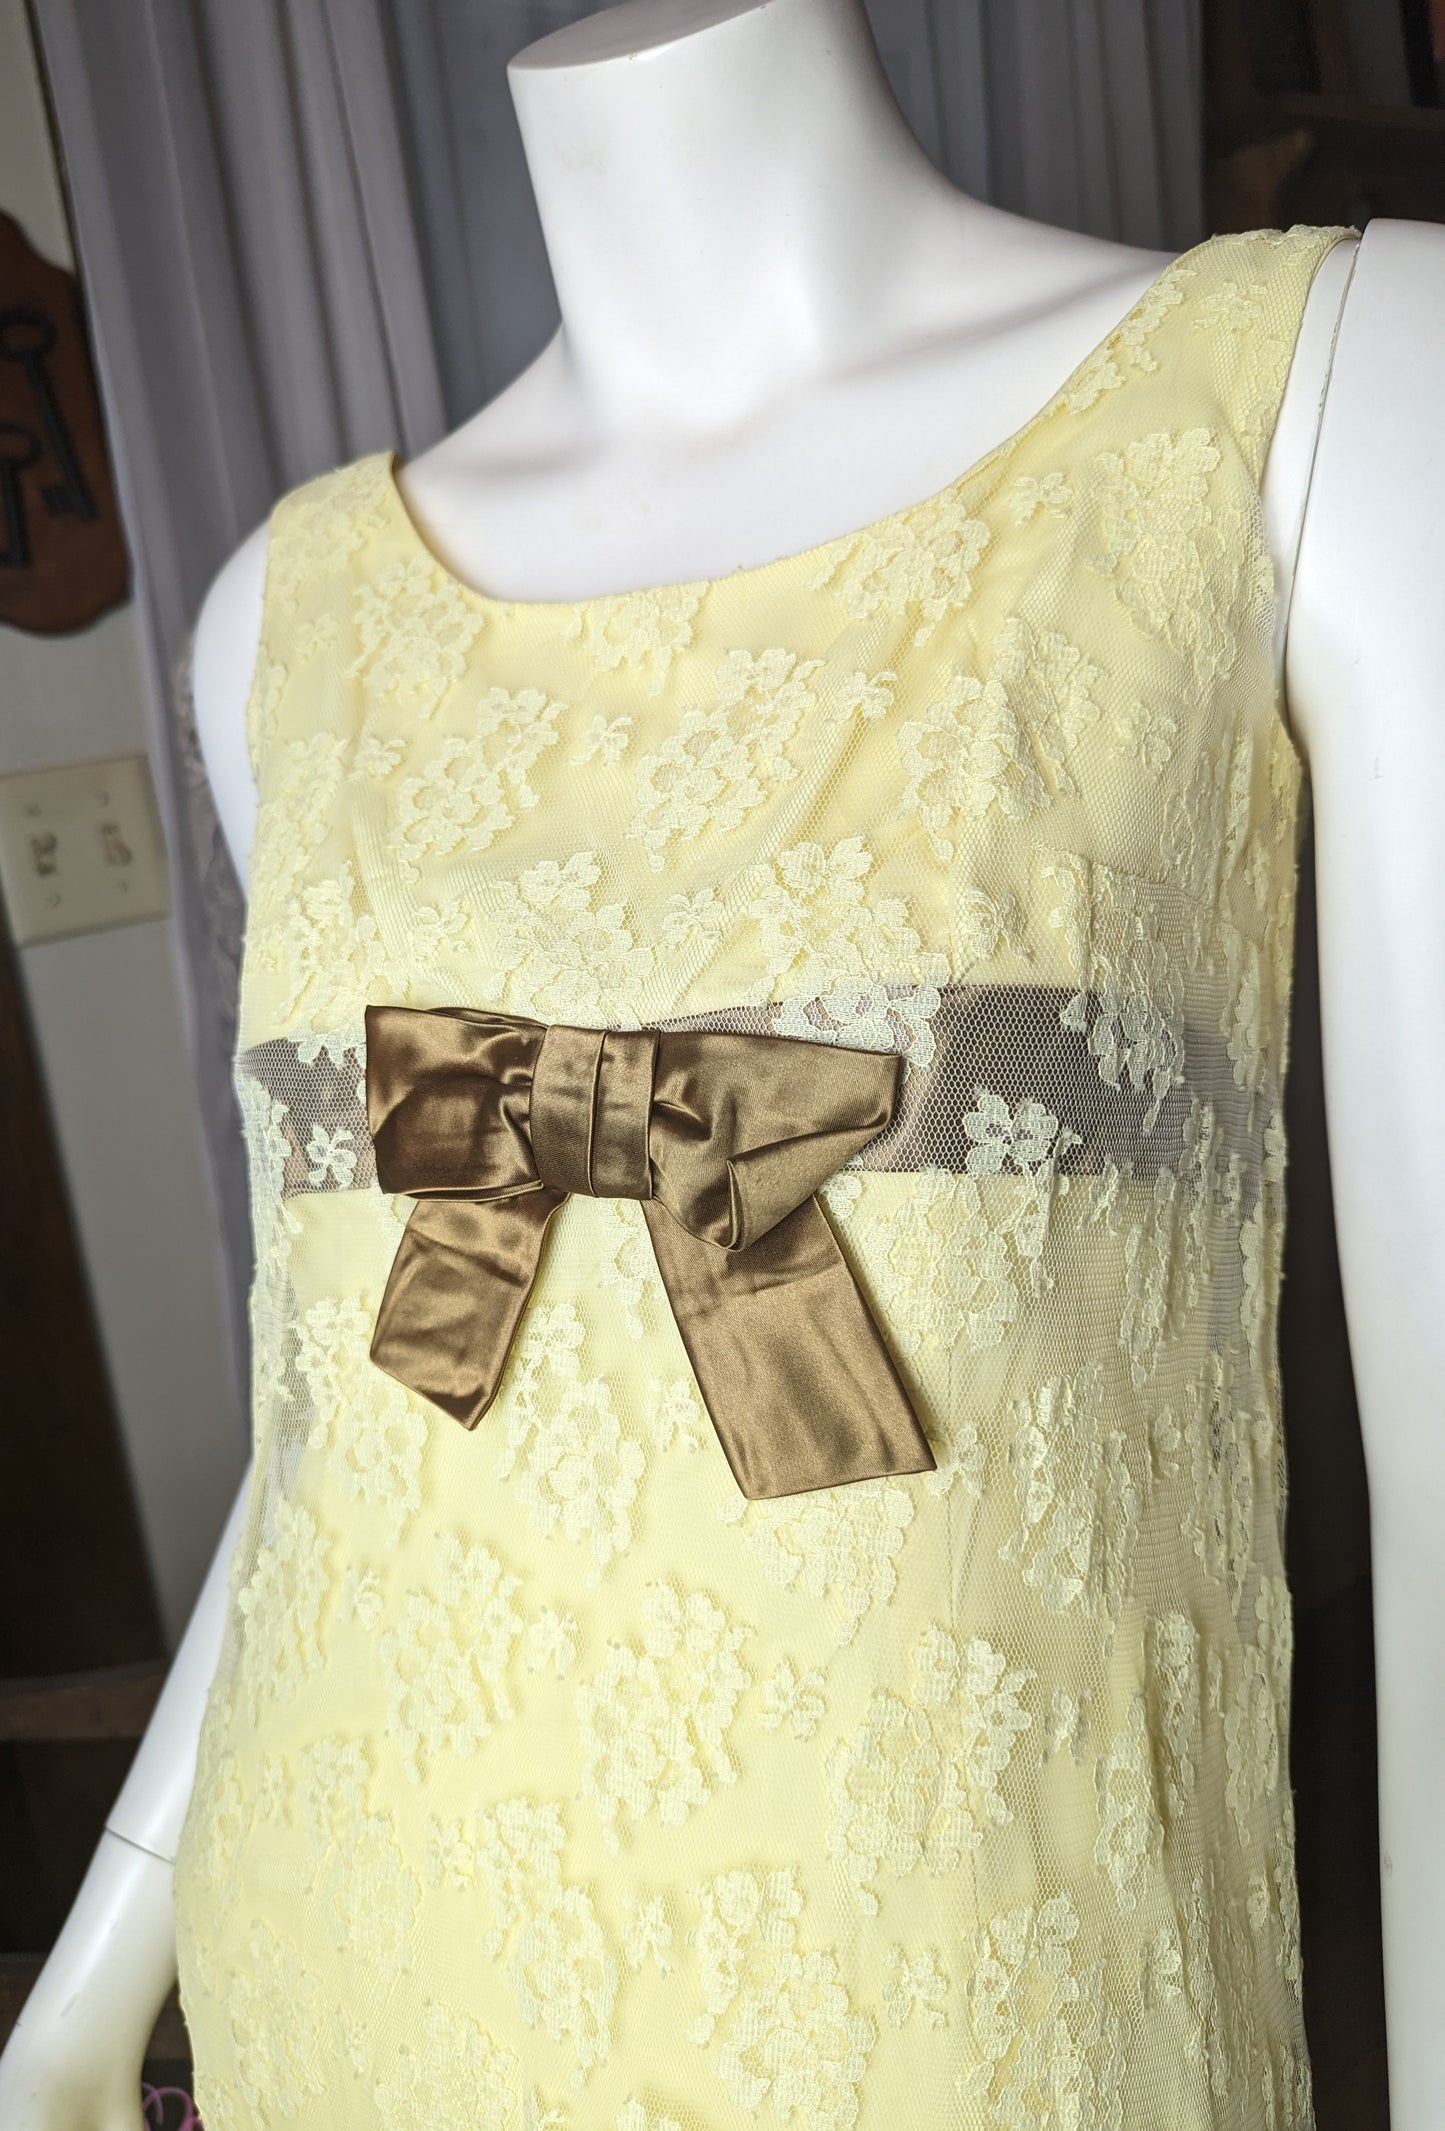 1960s Buttercup Yellow Lace Overlay Prom Dress